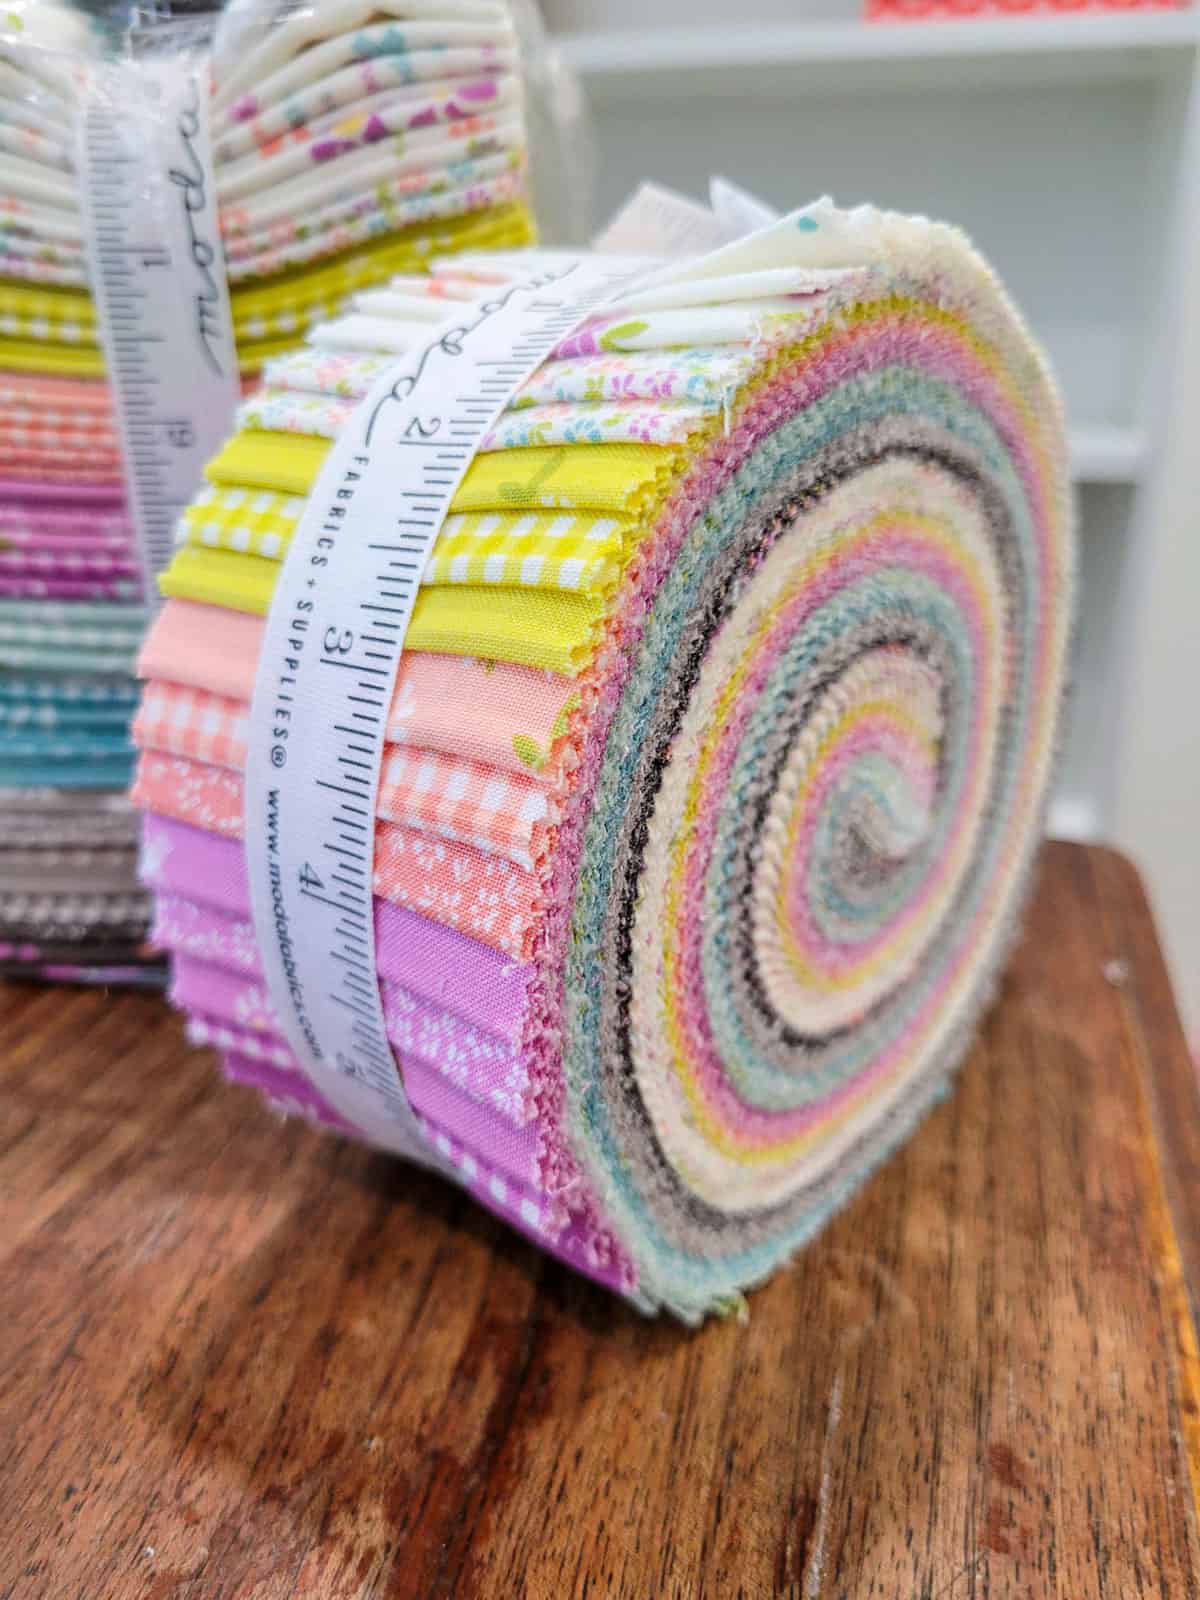 Jelly Roll Quilt Patterns from A Quilting Life featured by Top US Quilt Blog, A Quilting Life